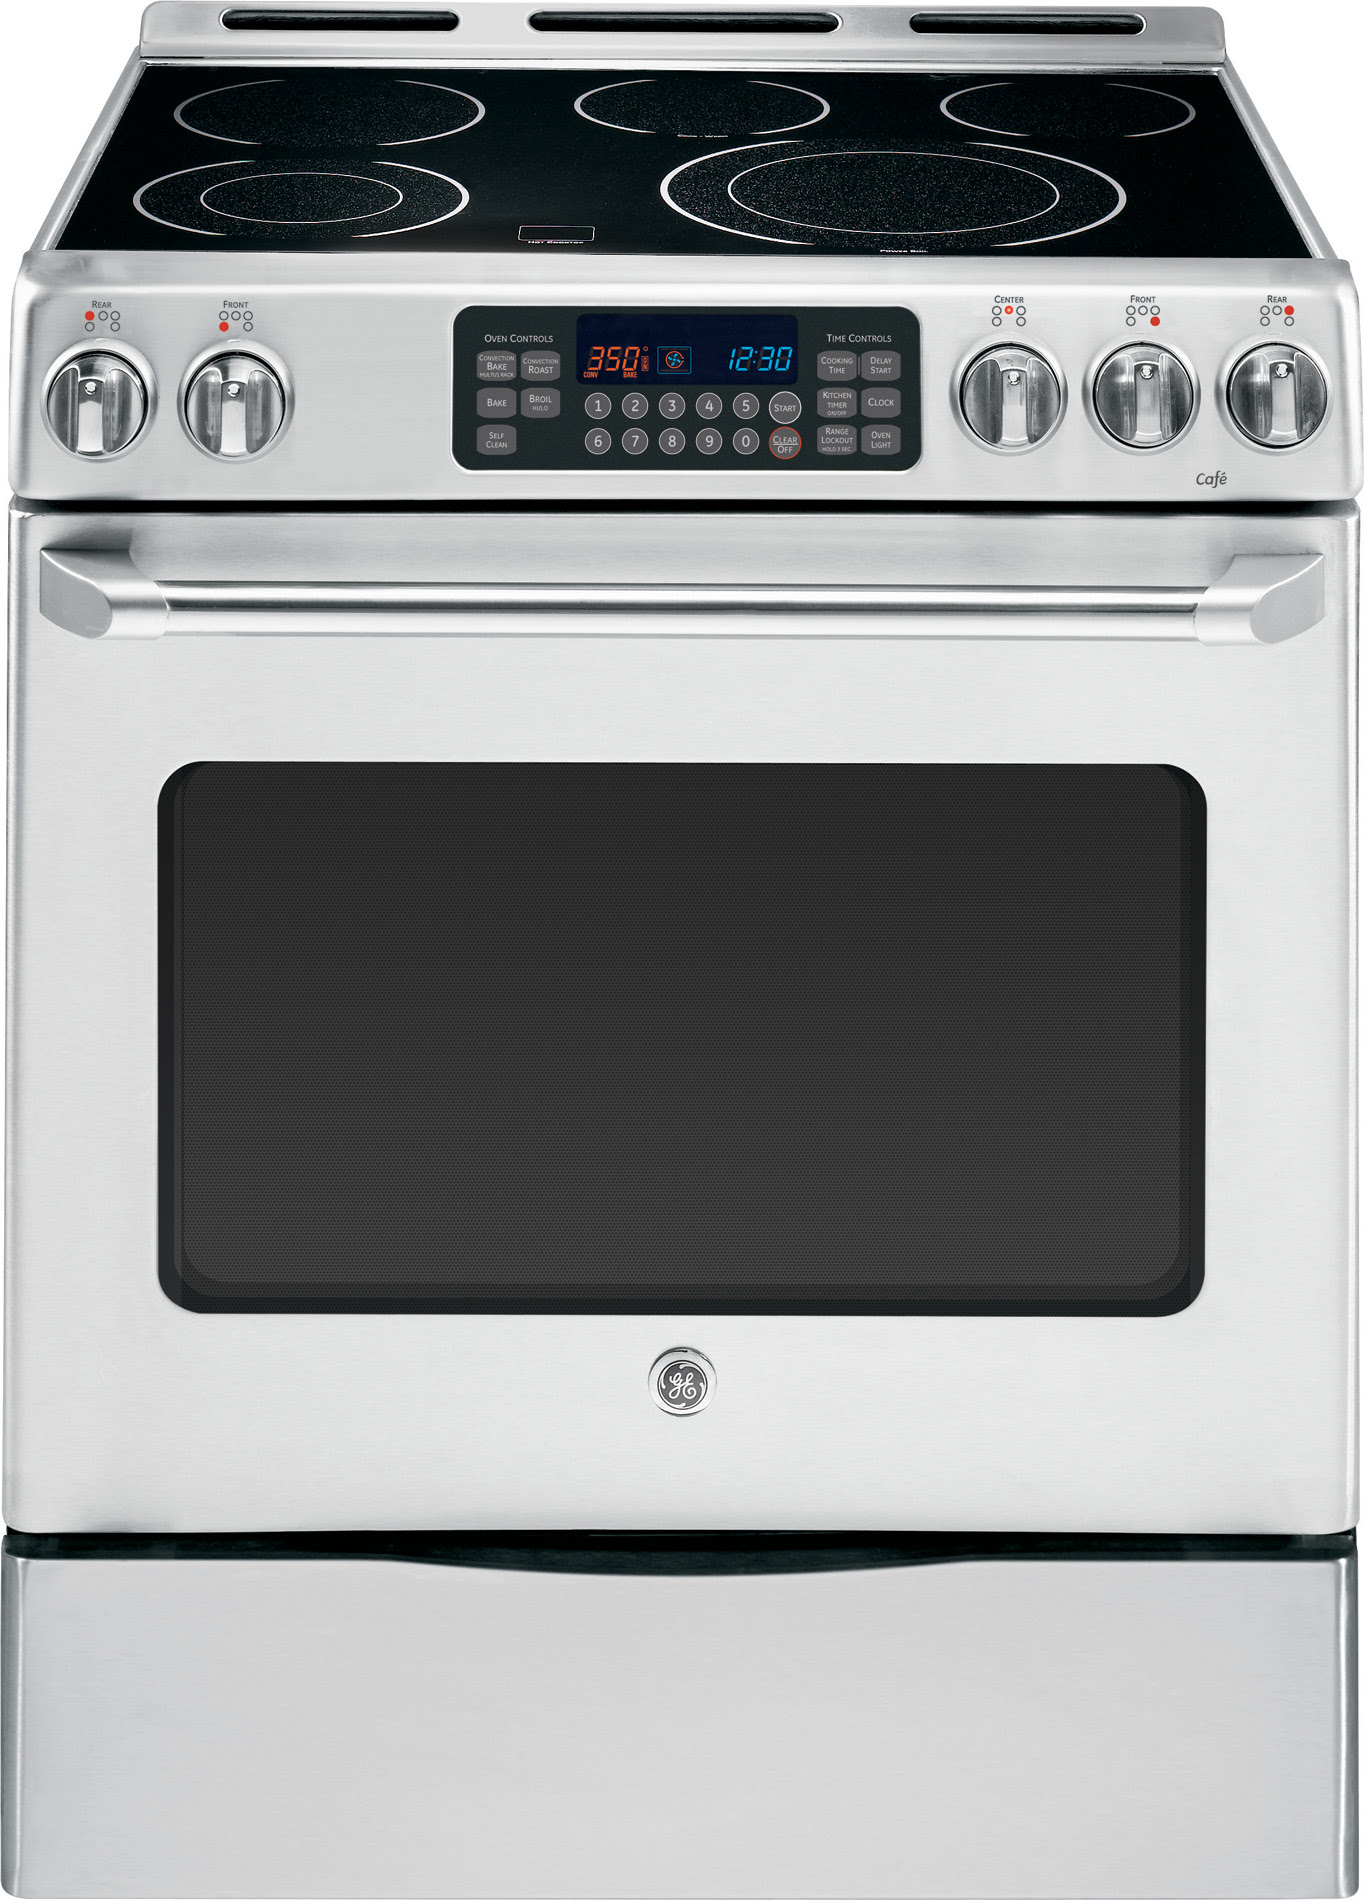 ge-caf-series-5-4-cu-ft-convection-electric-range-w-storage-drawer